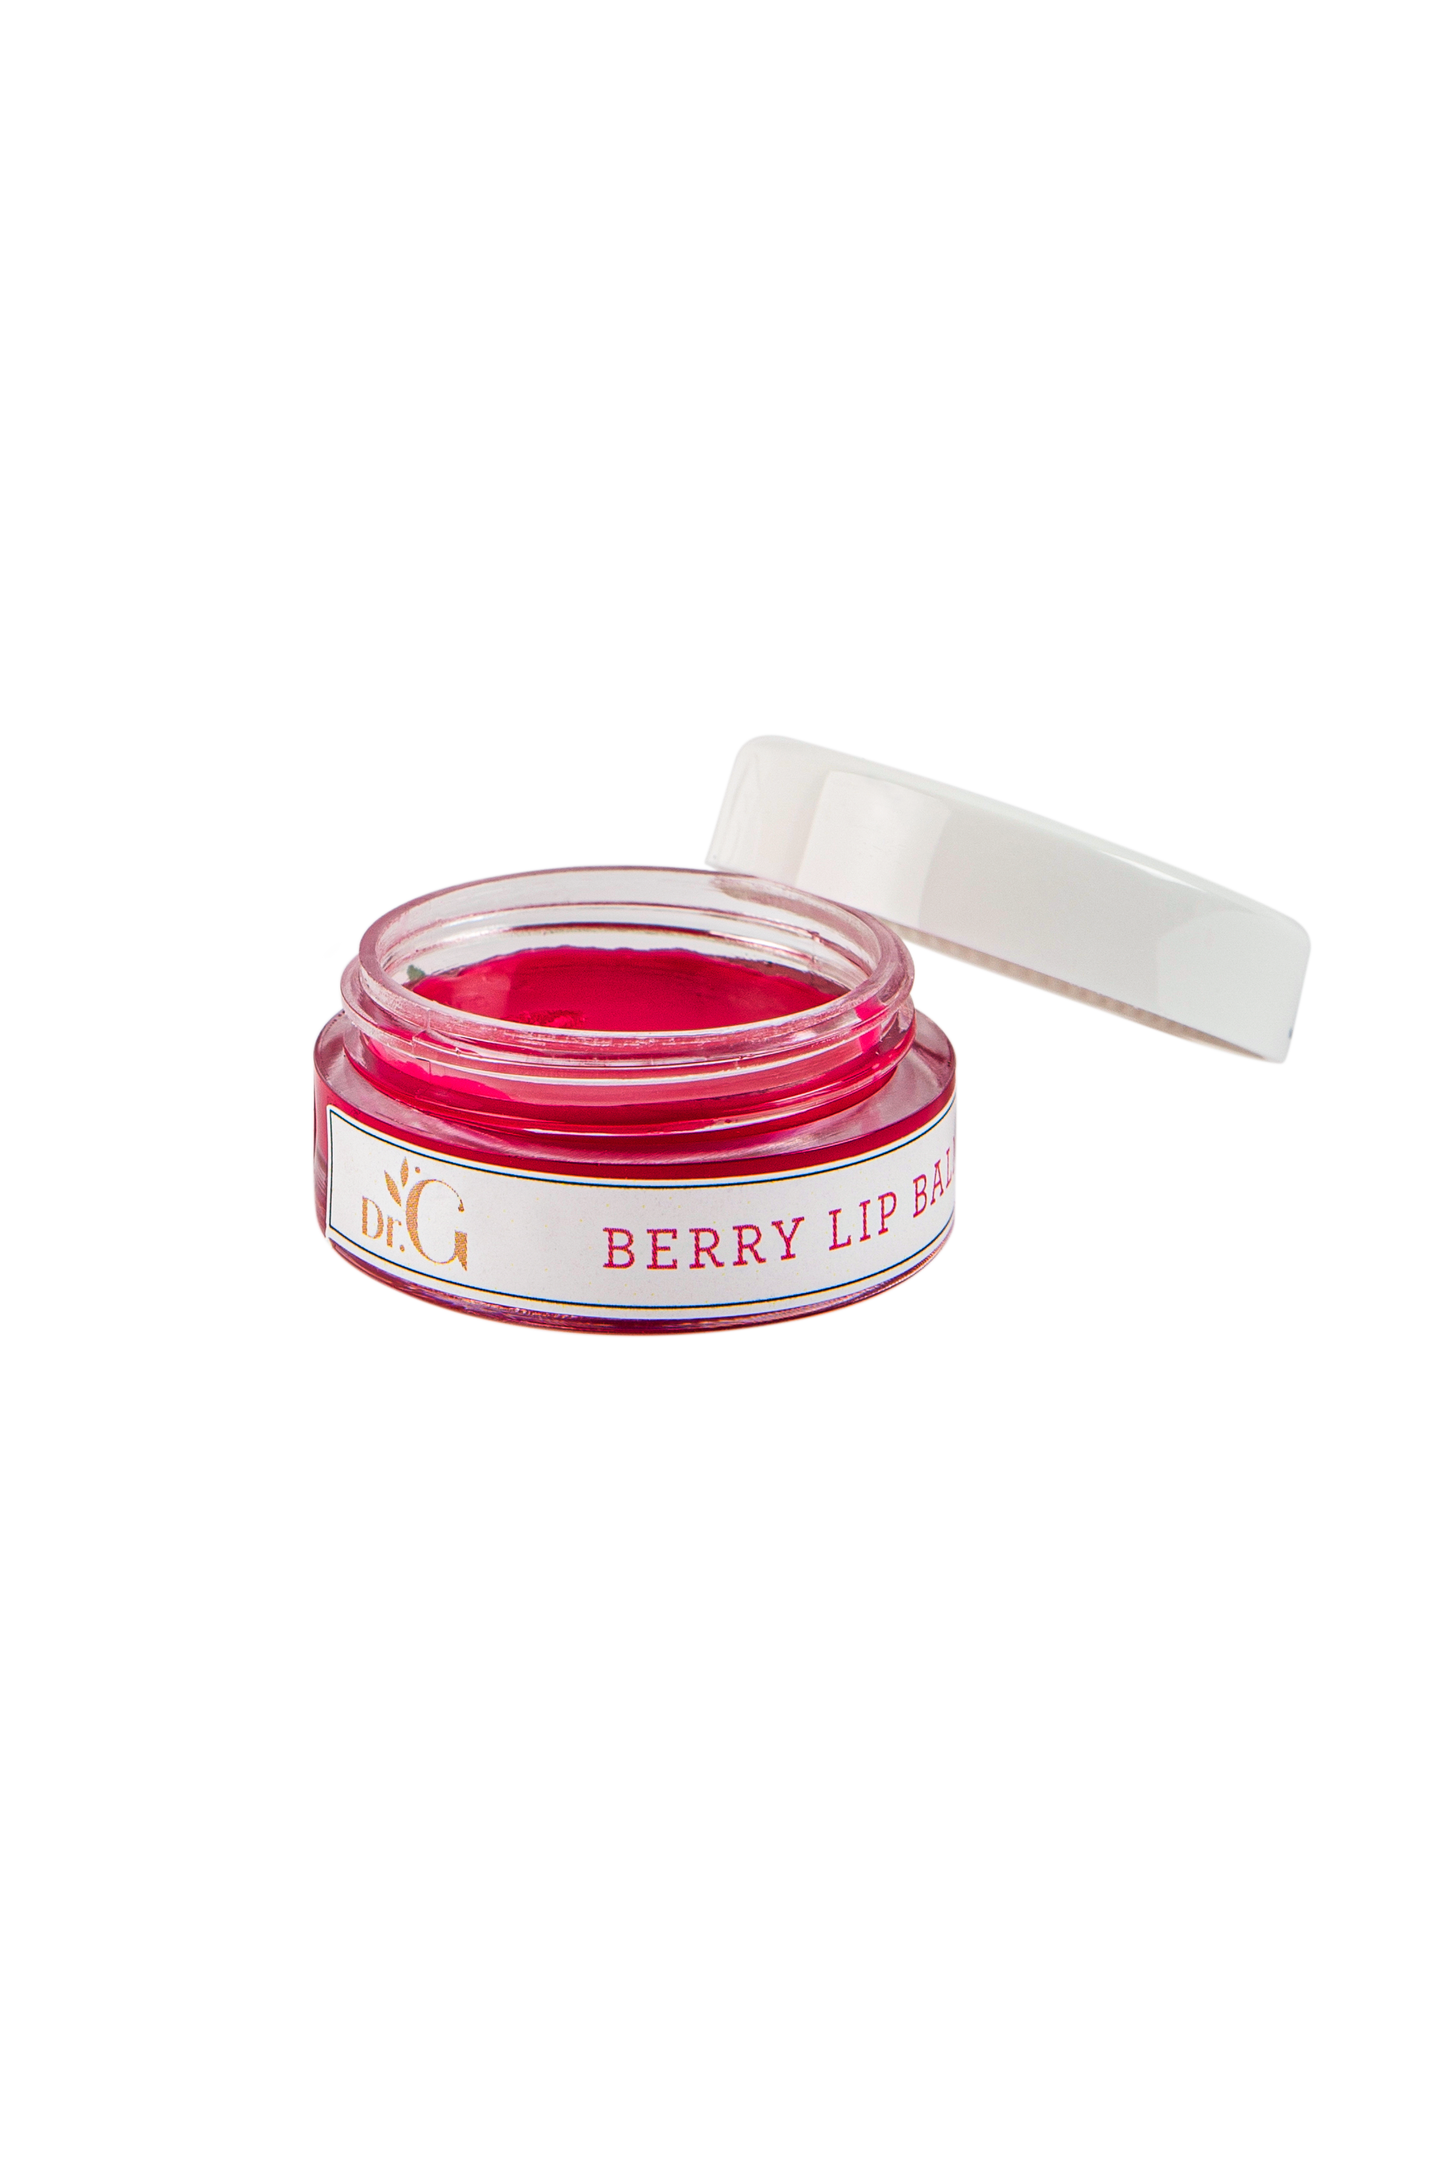 DR G Berry Lip Balm-Pack of 2